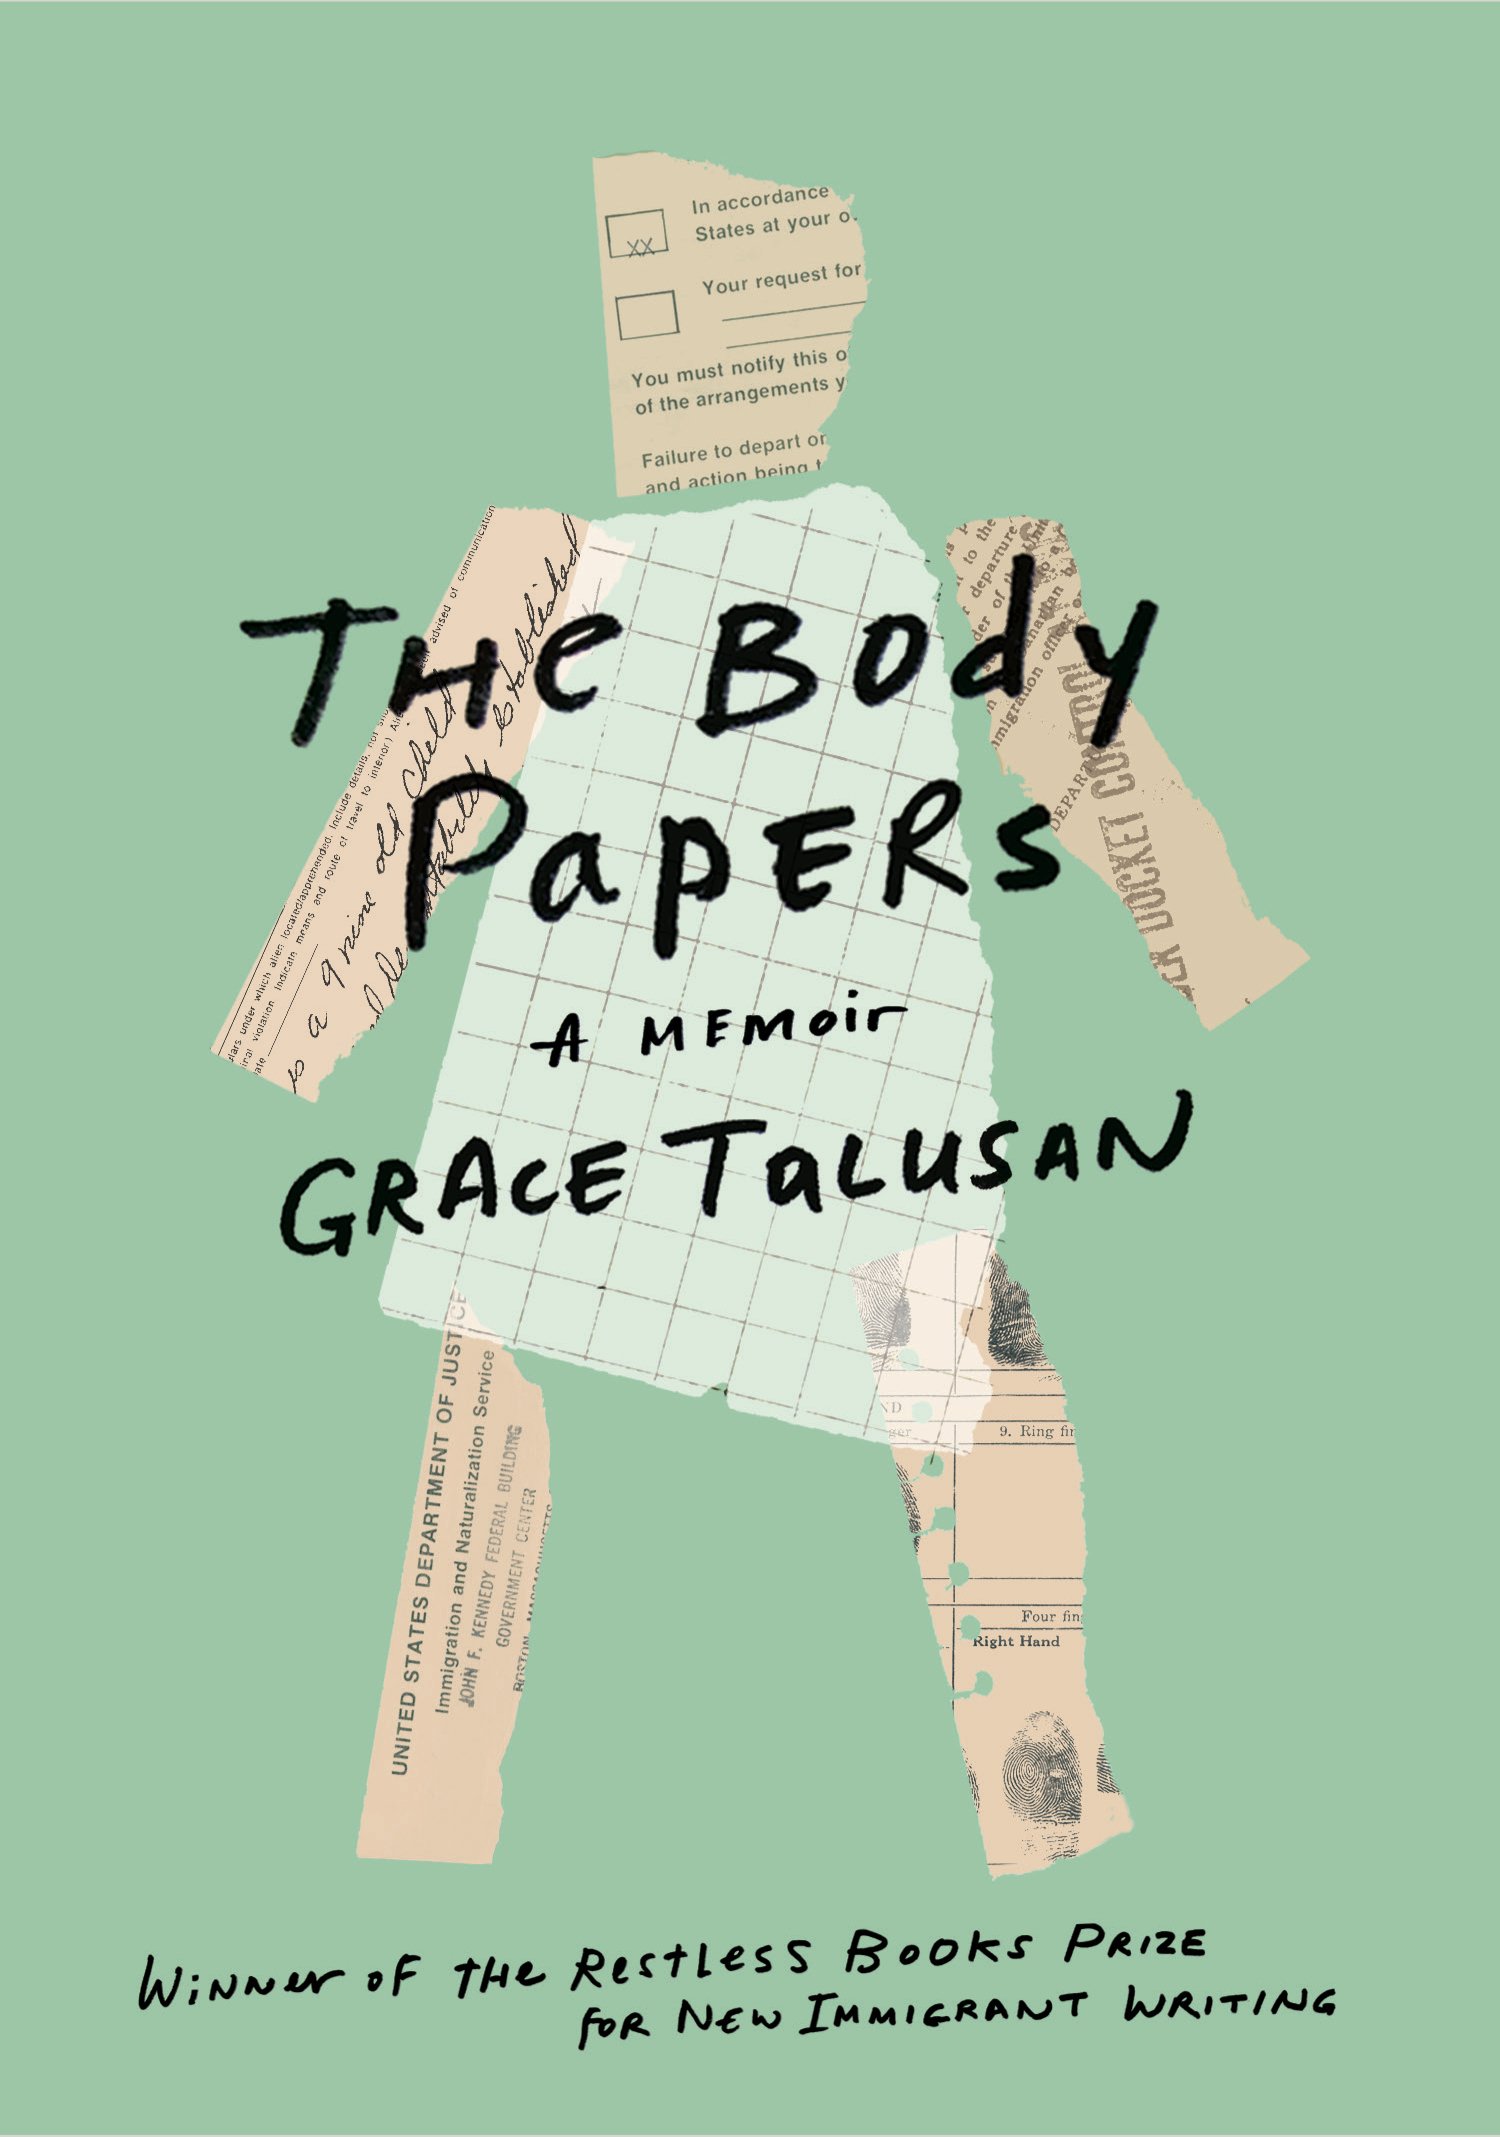 The Body Papers book cover.jpg